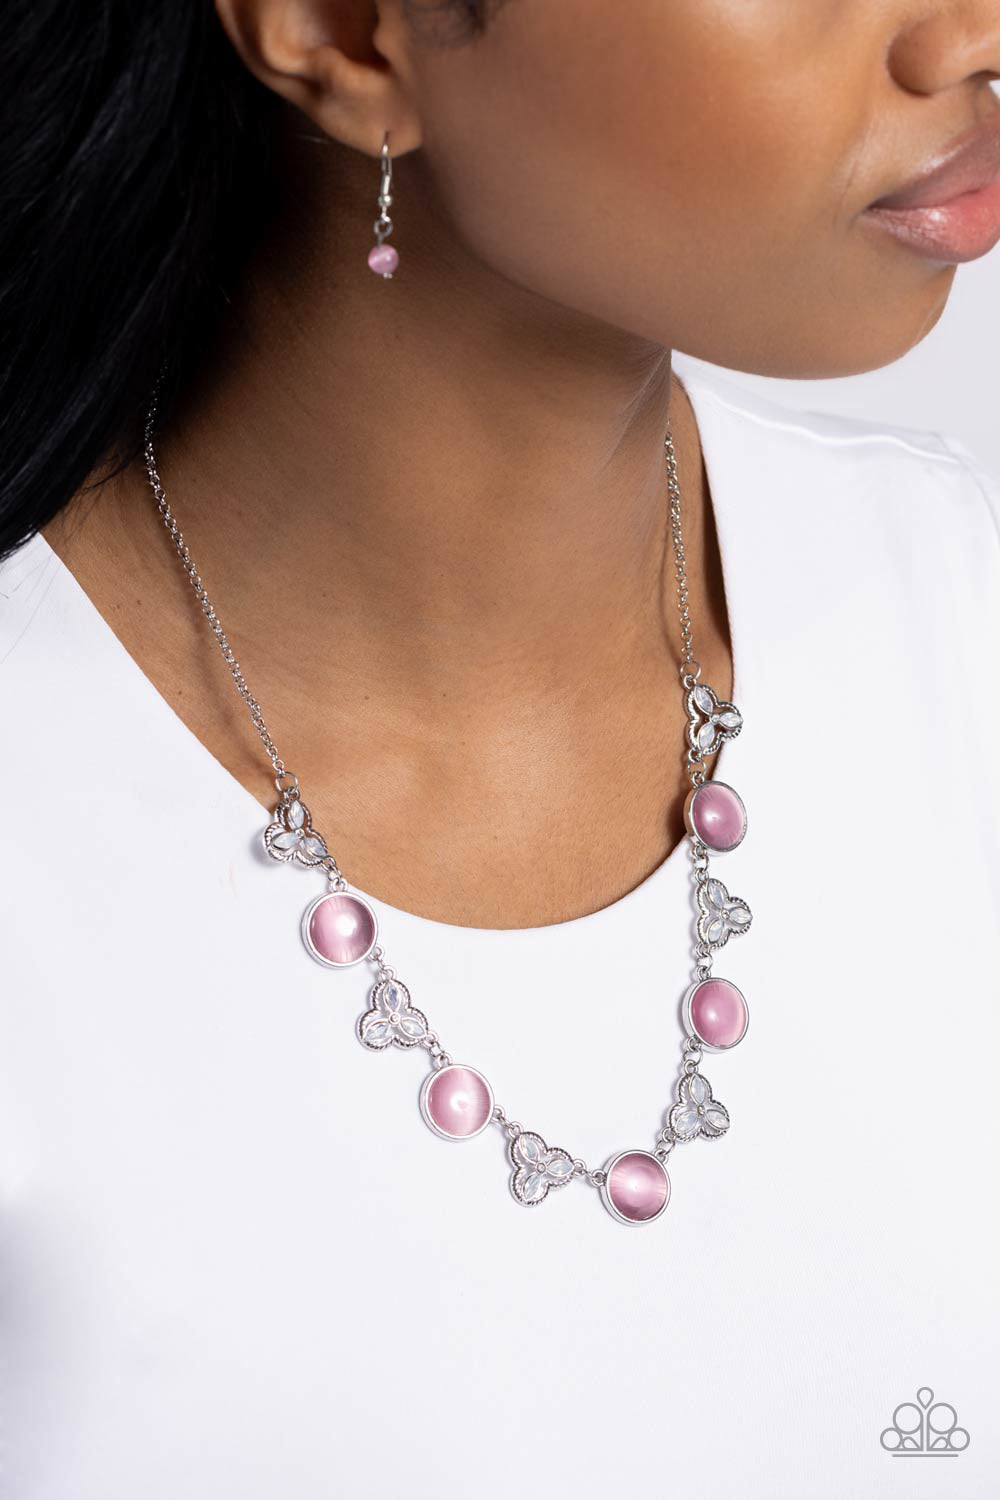 Floral Crowned - Pink Cat's Eye Stones/Opalescent Gems Paparazzi Necklace & matching earrings